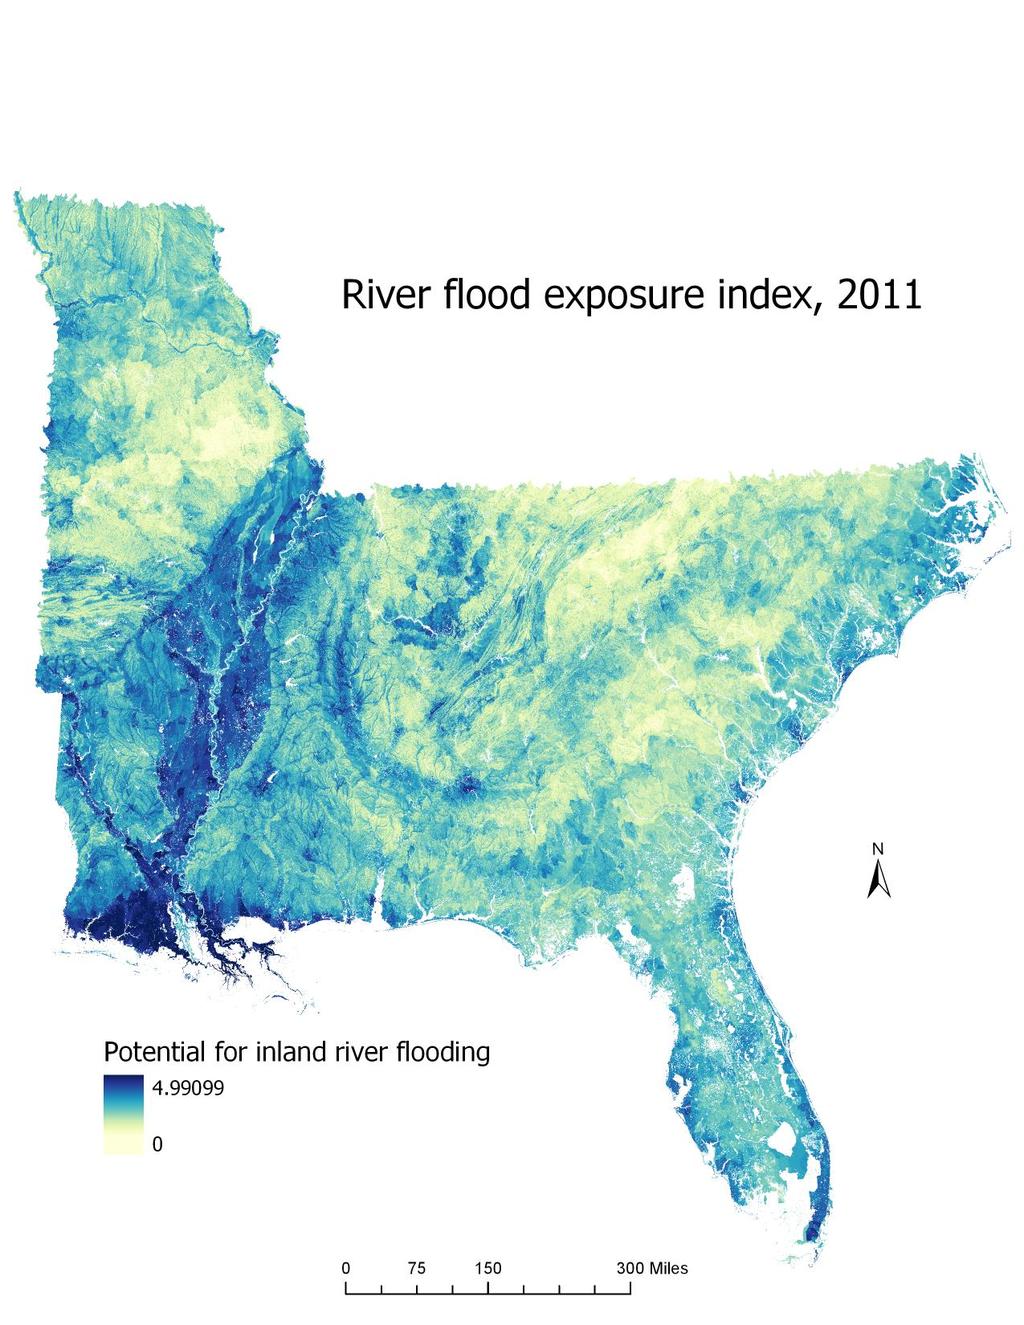 Inland flood exposure and vulnerability Adapted InVEST coastal vulnerability model to assess relative potential for inland river flooding driven by precipitation Variables included: